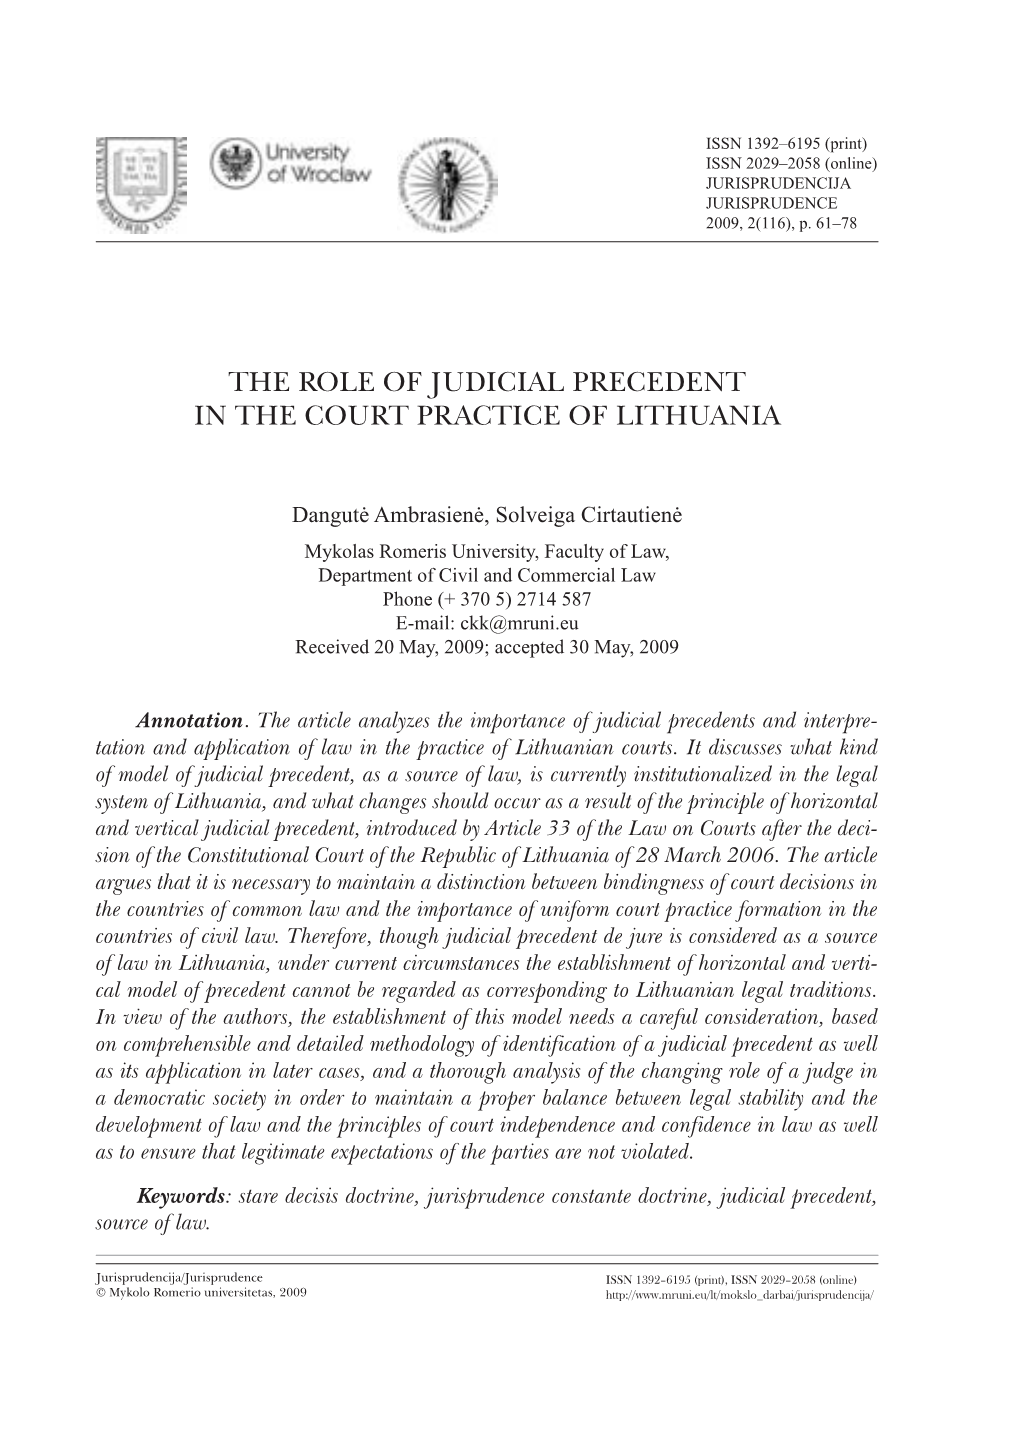 The Role of Judicial Precedent in the Court Practice of Lithuania